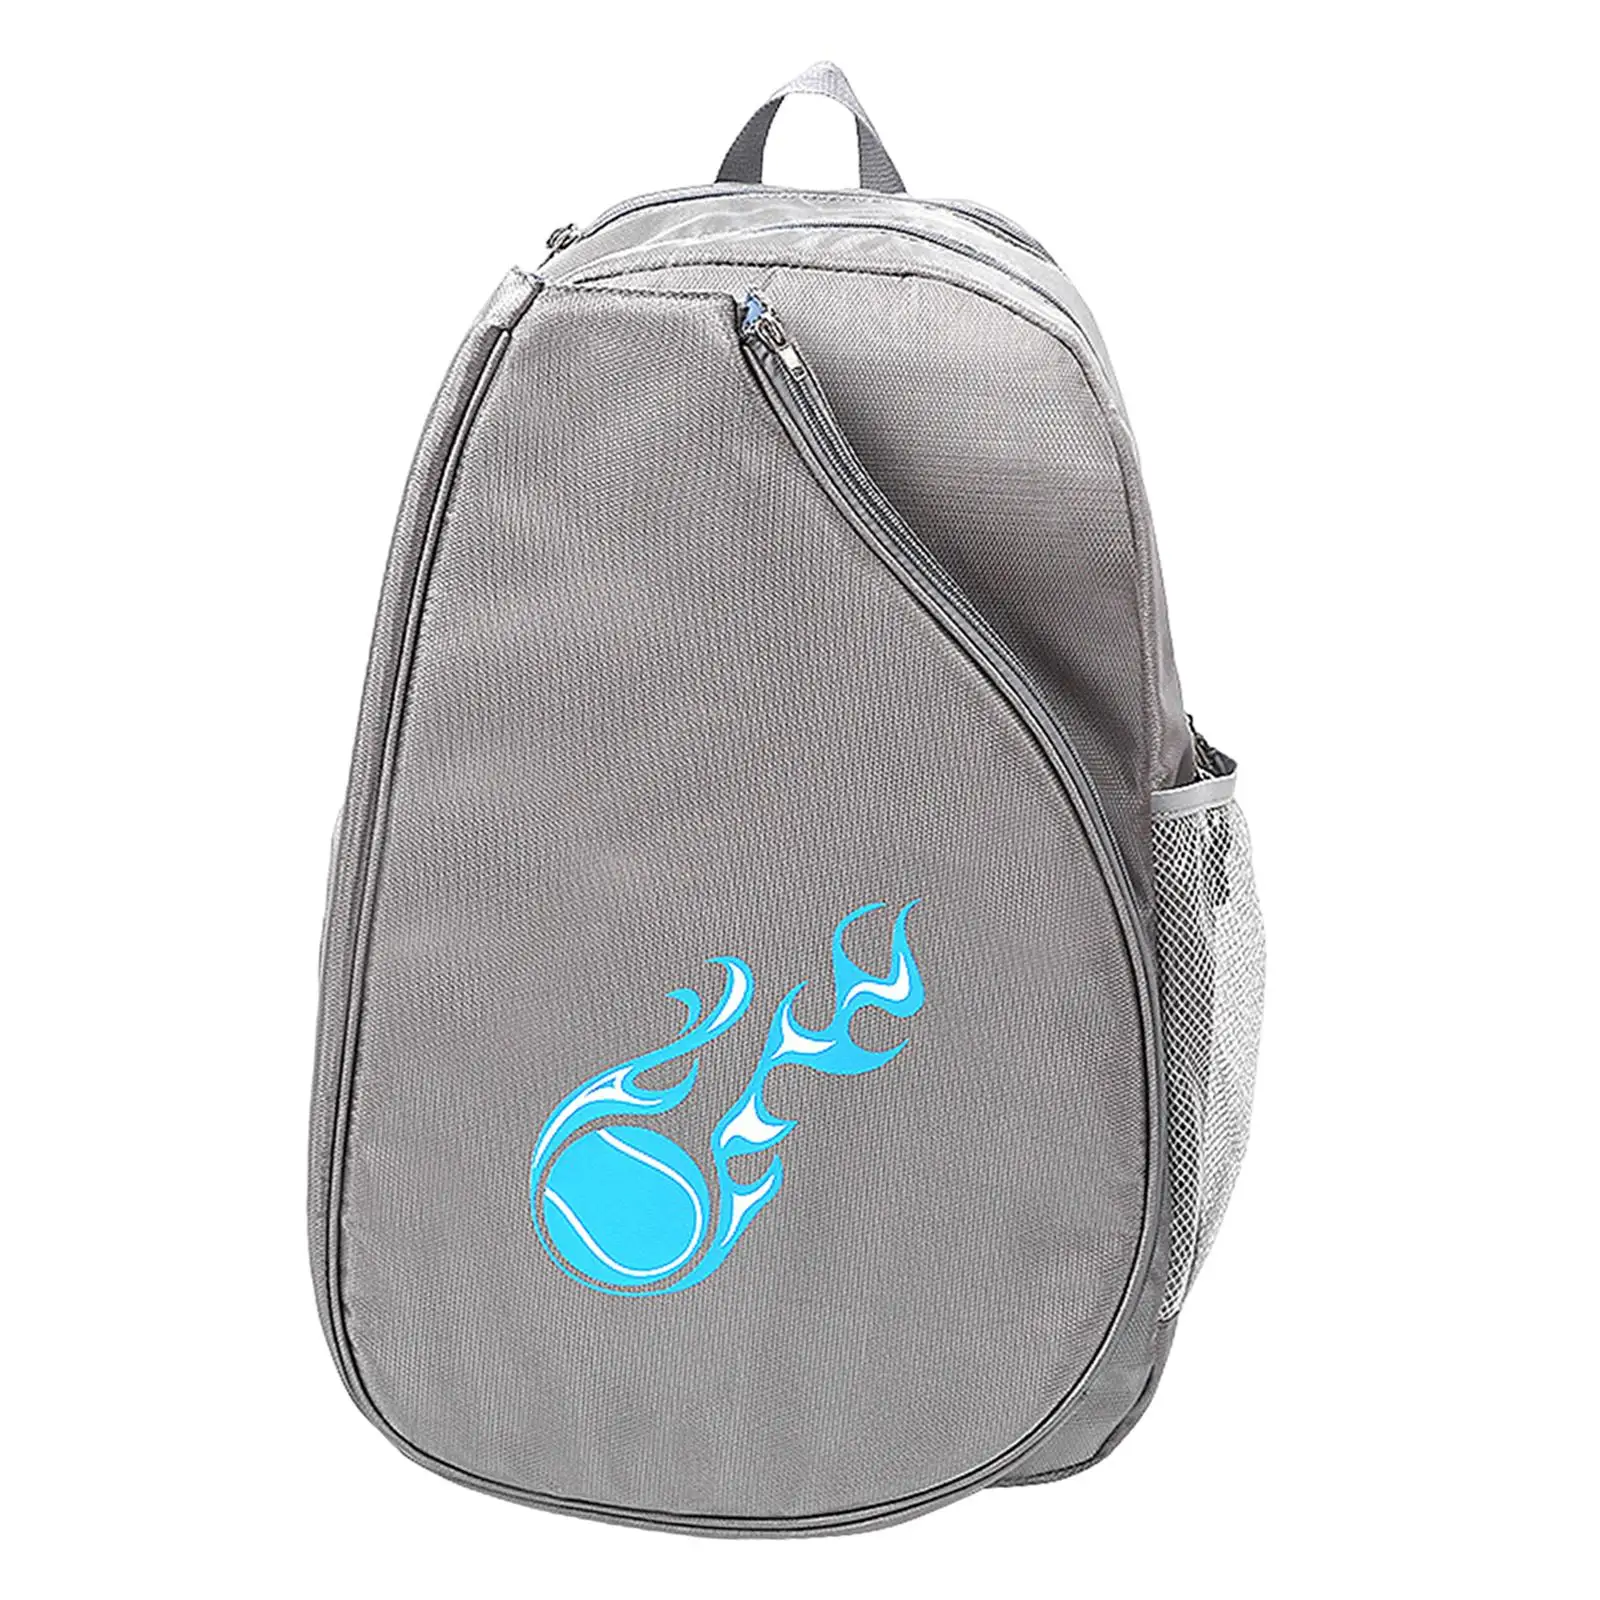 Carrying Tote Organizer Carry Case Pickleball Paddles Backpack Tennis Racket Bag for Kids Outdoor Sports Tennis Racquet Practice